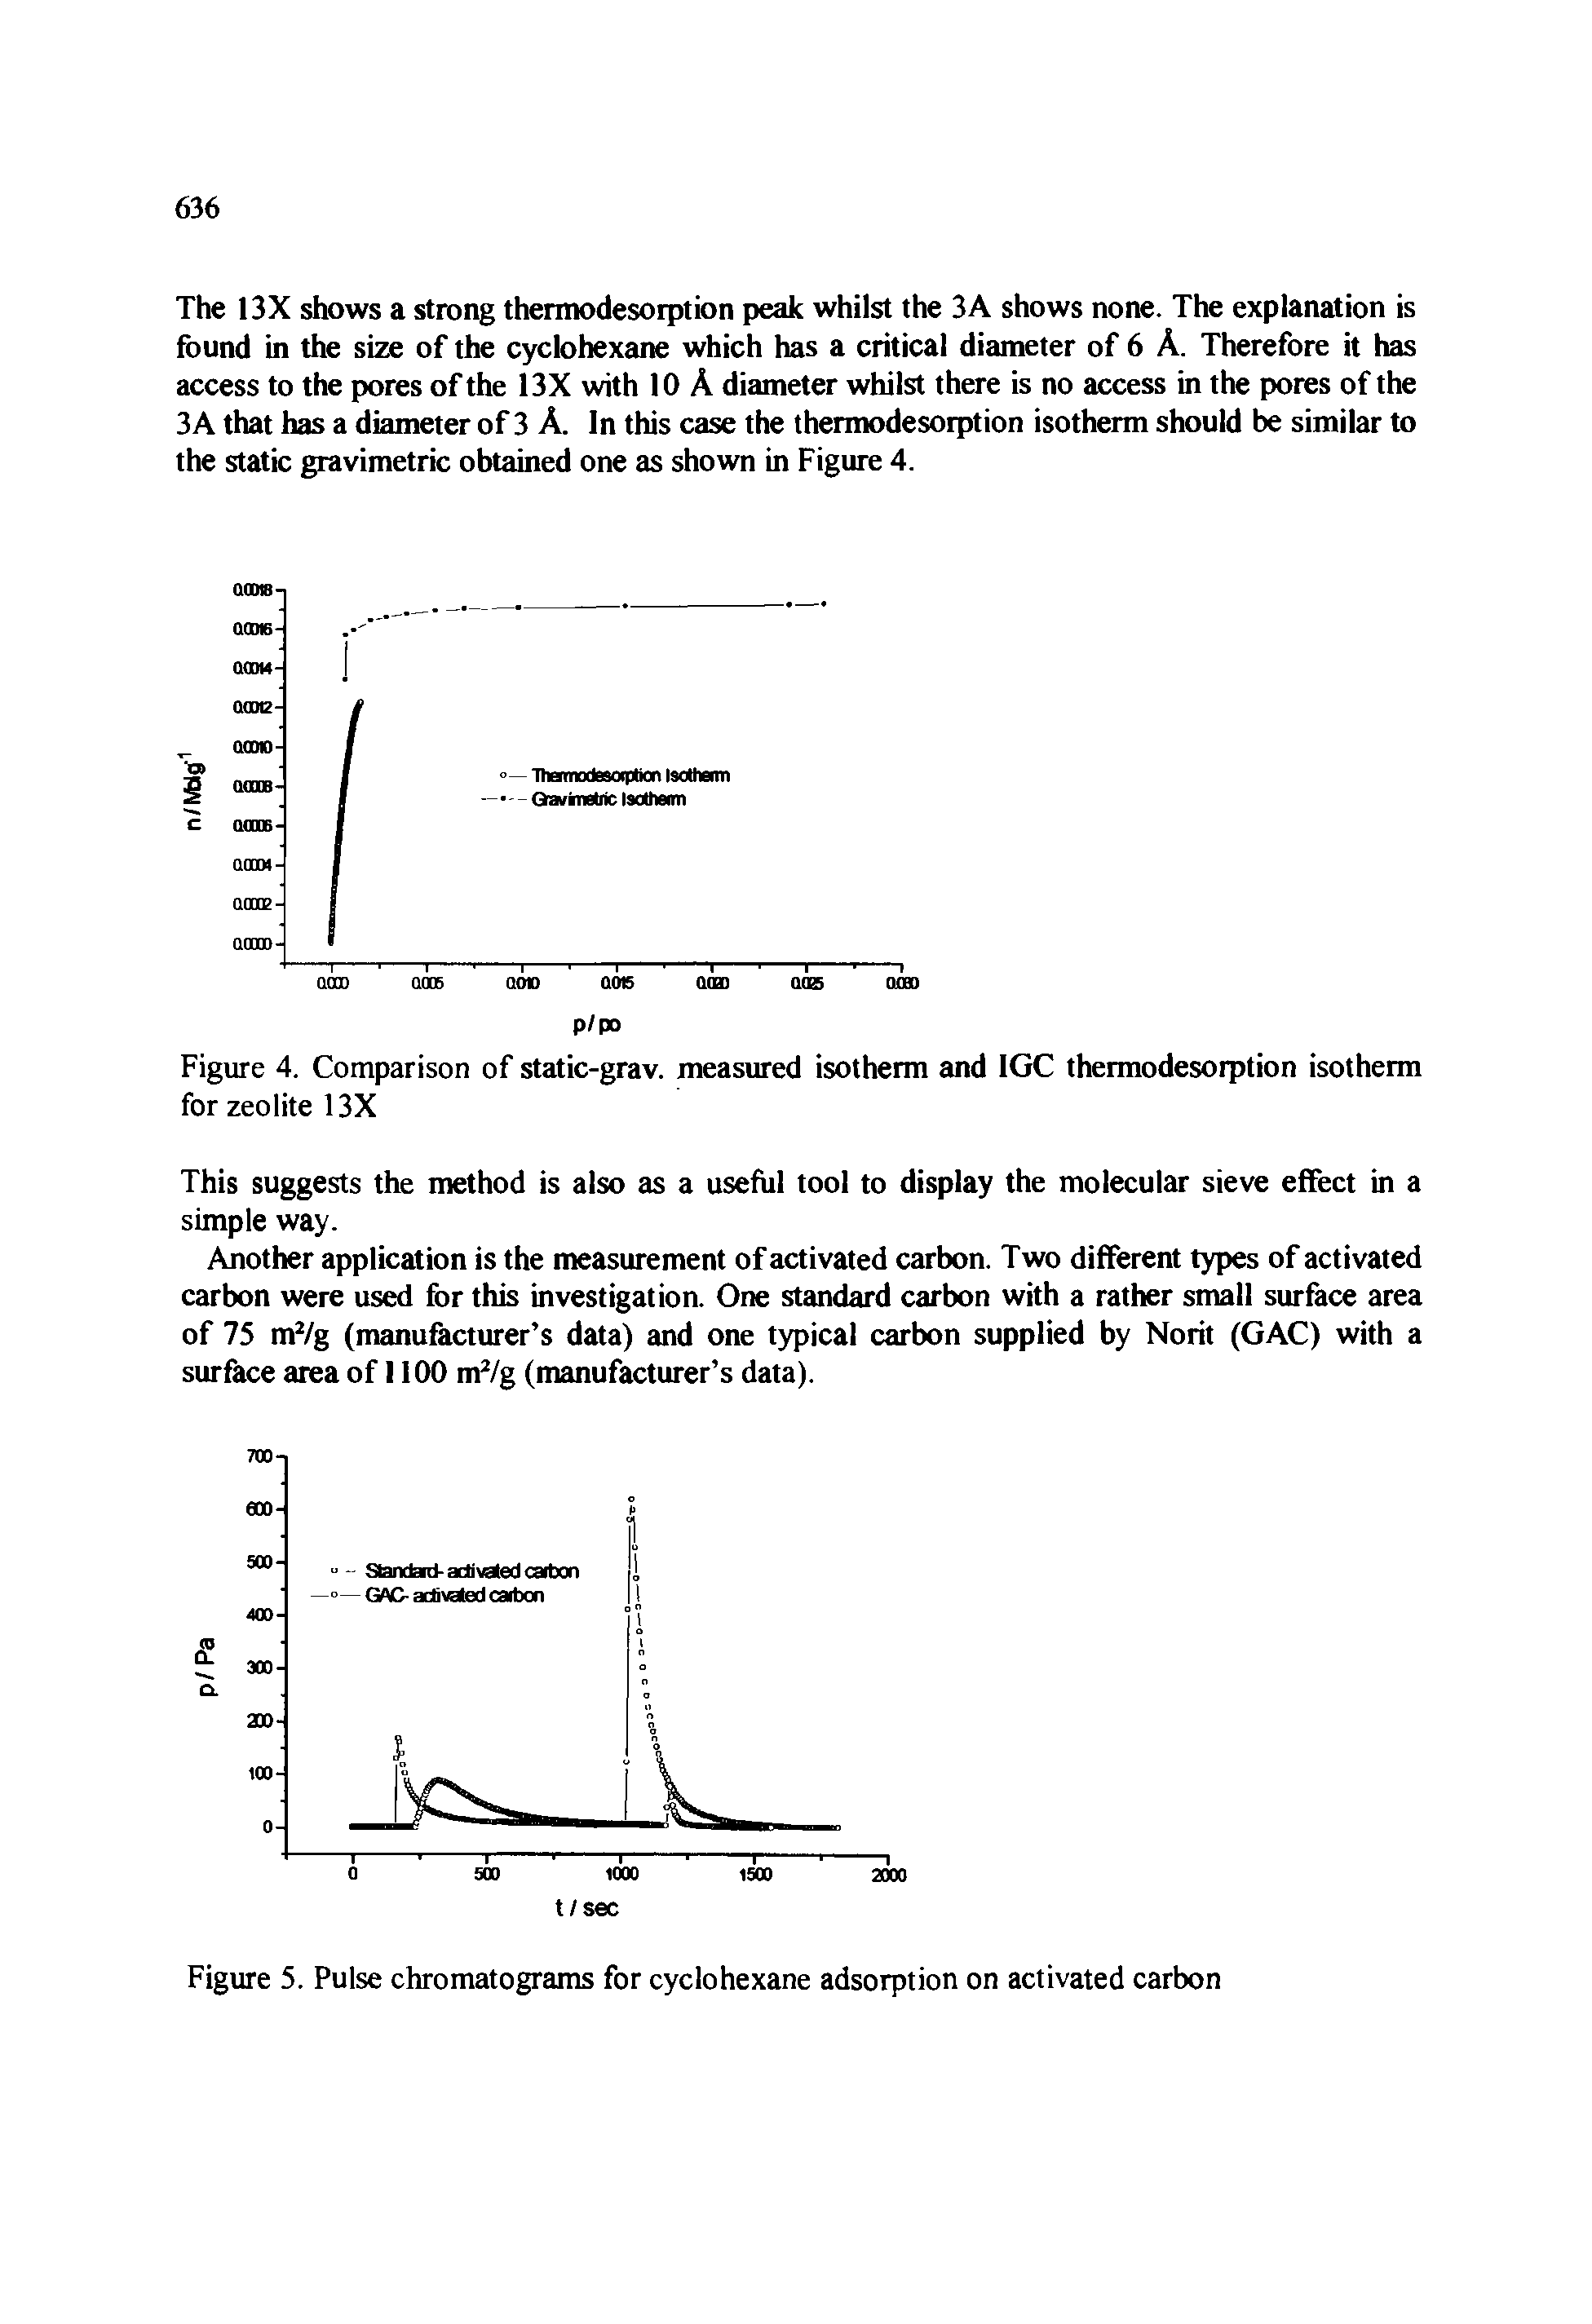 Figure 5. Pulse chromatograms for cyclohexane adsorption on activated carbon...